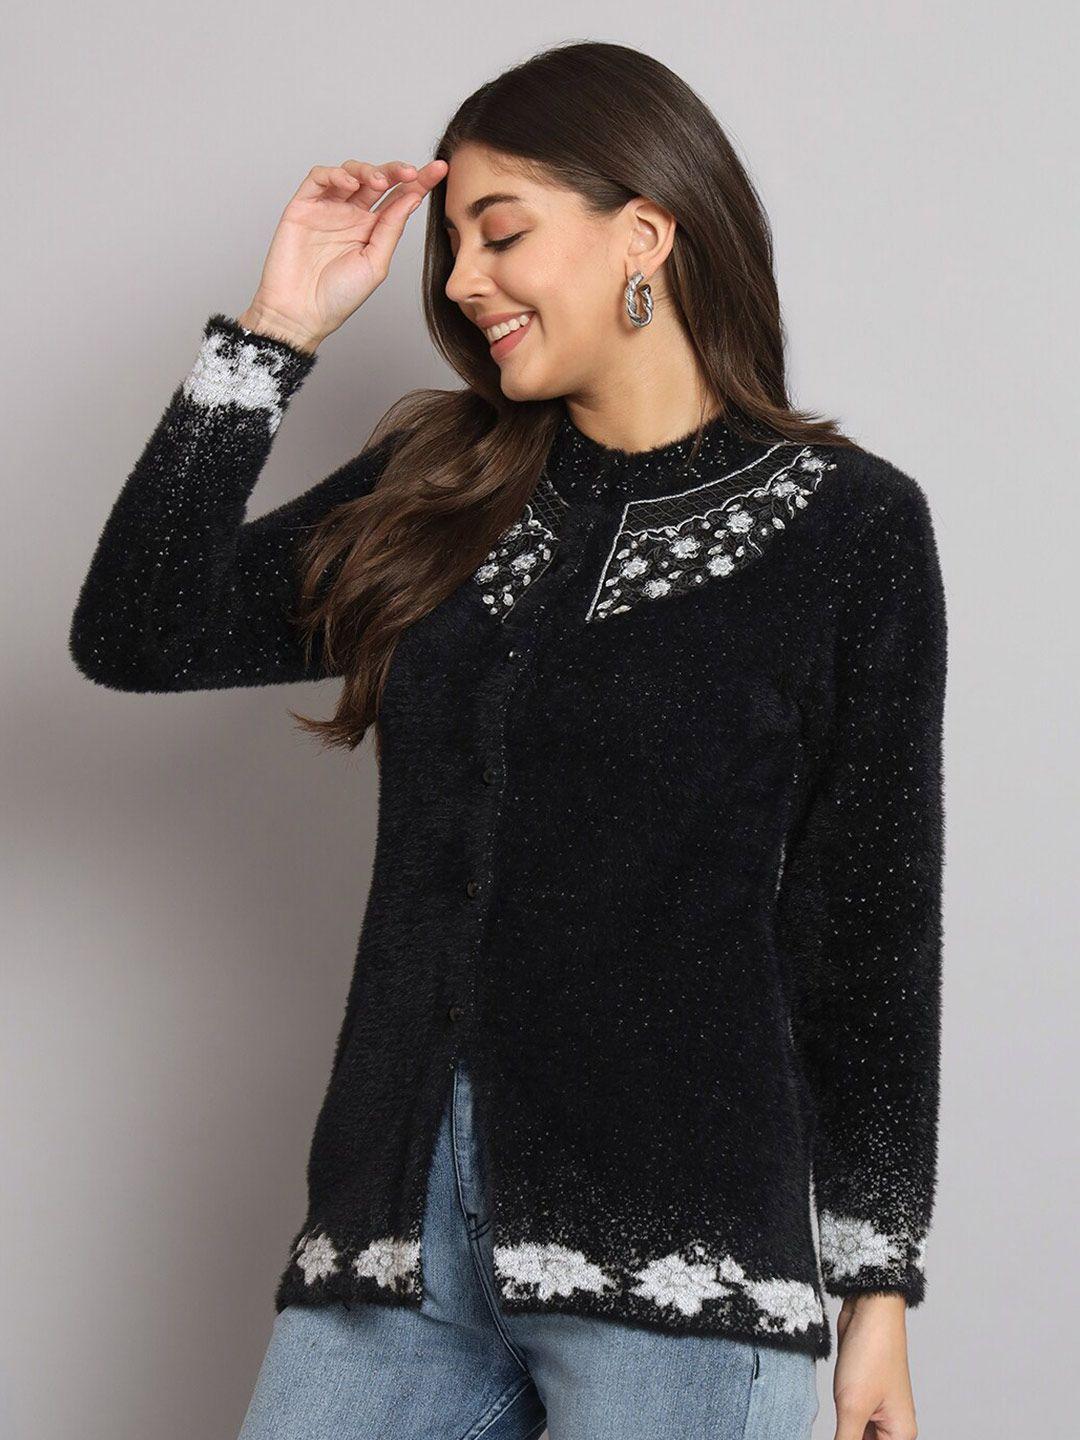 ewools floral embroidered woollen cardigan sweater